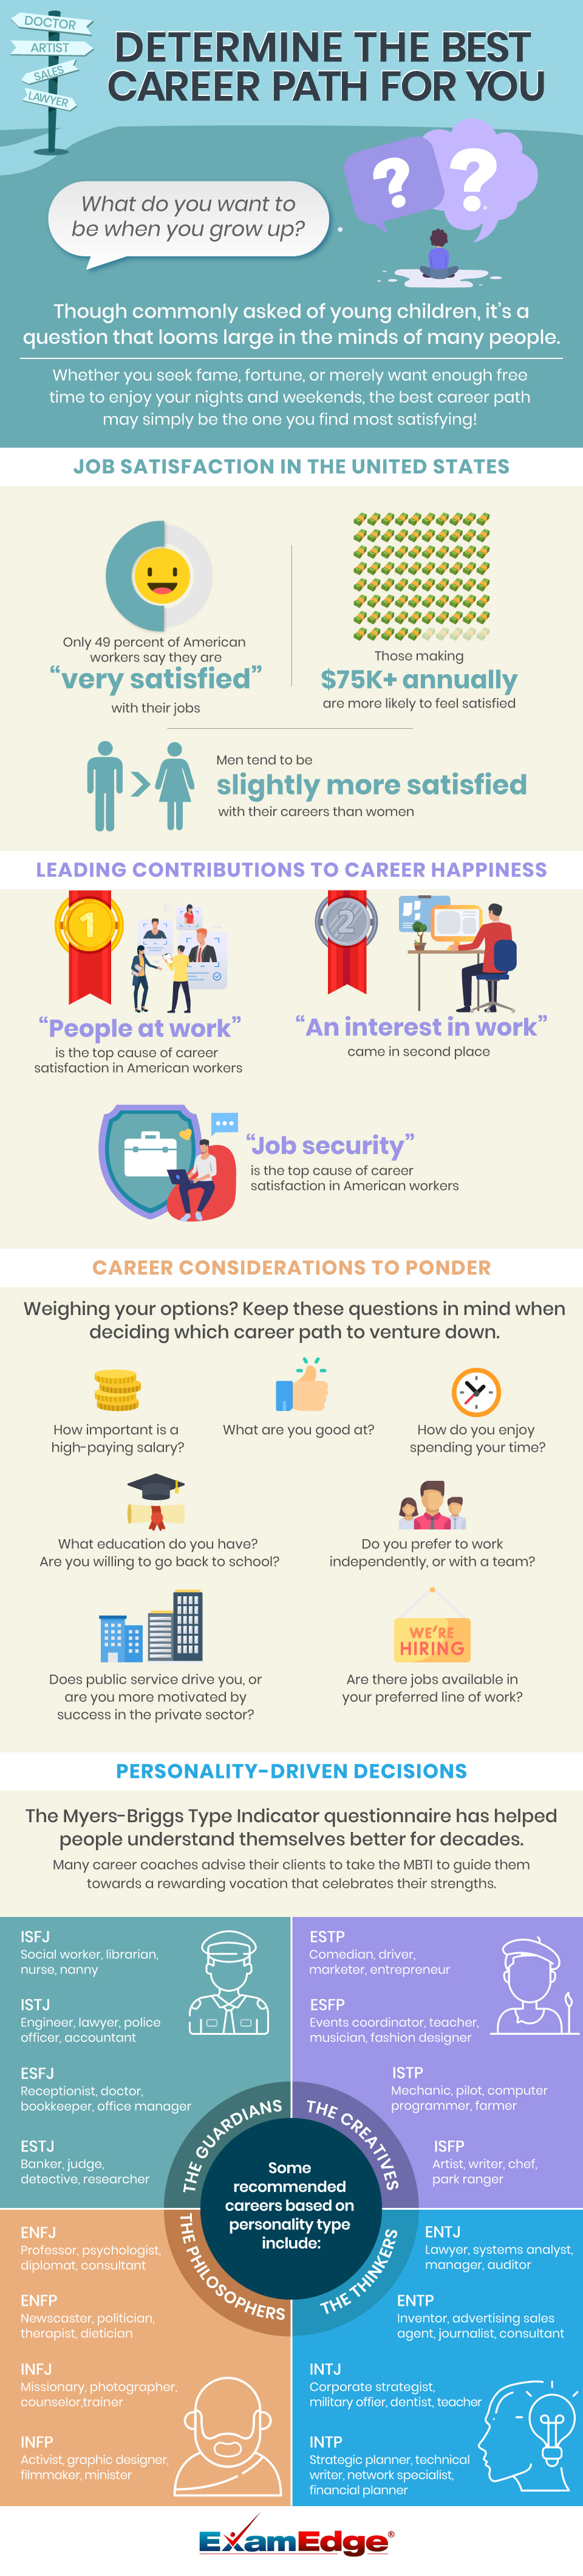 Determine the Best Career Path for You